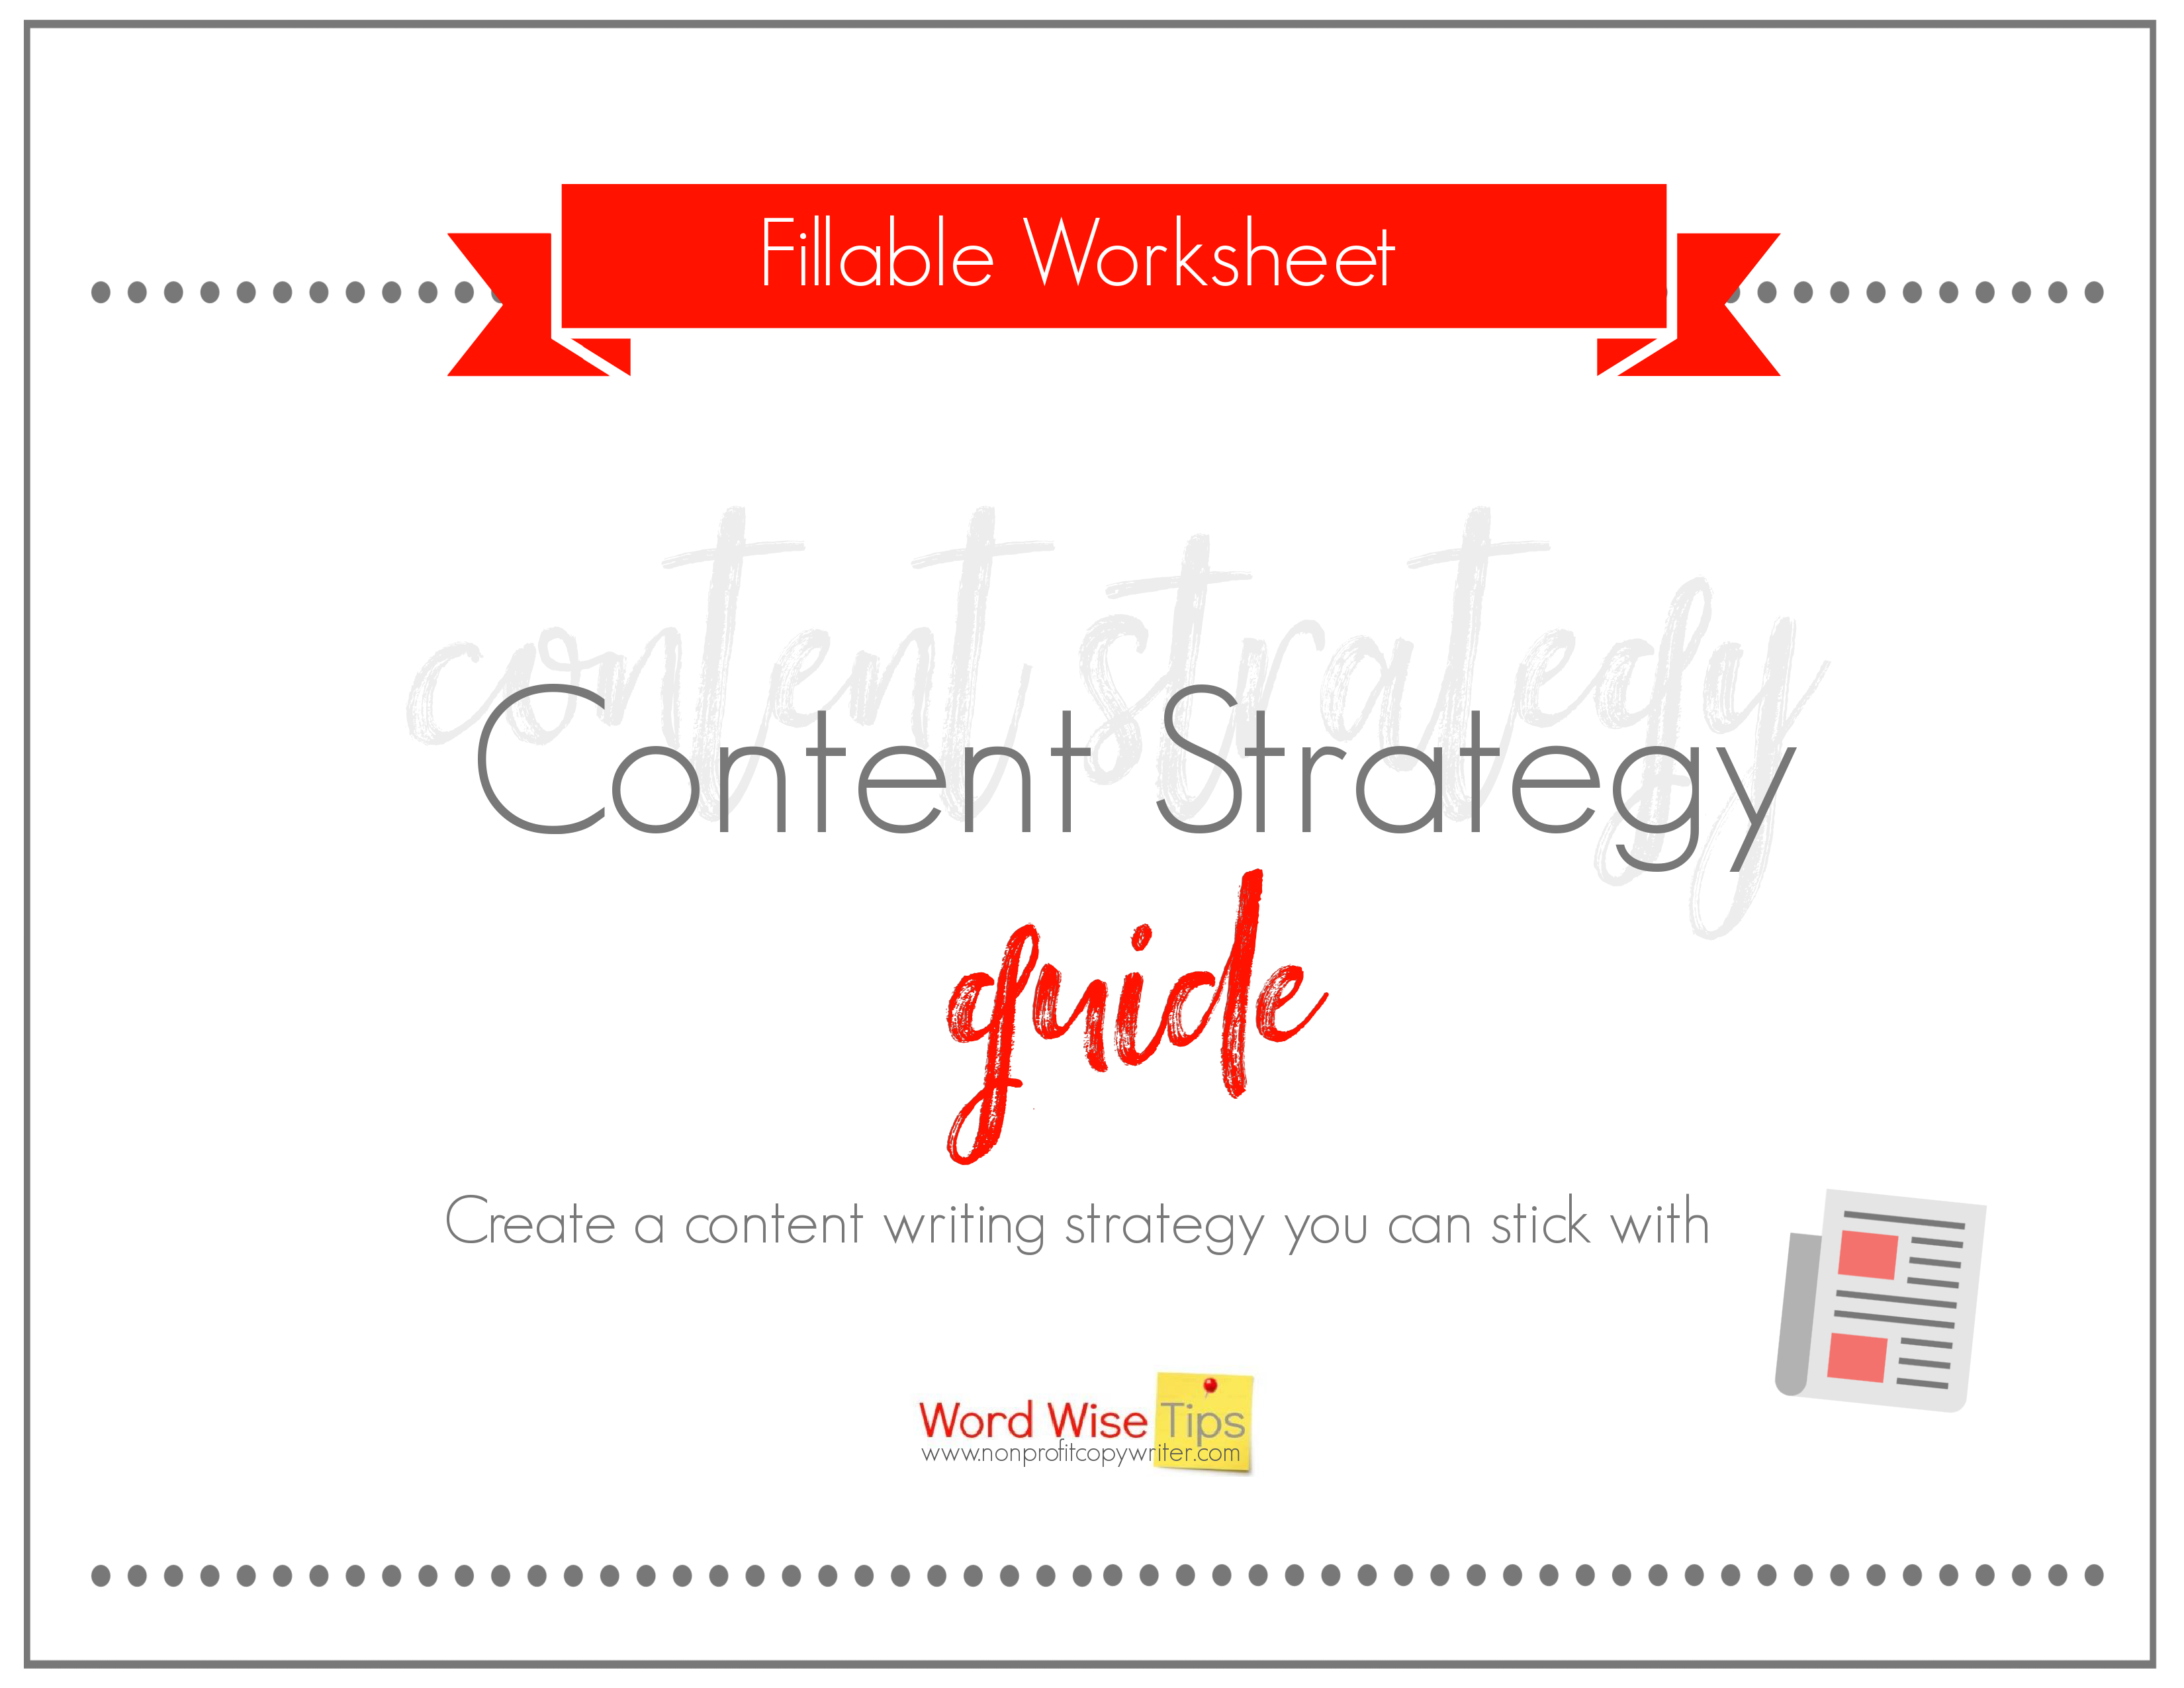 Content Strategy Guide Workbook